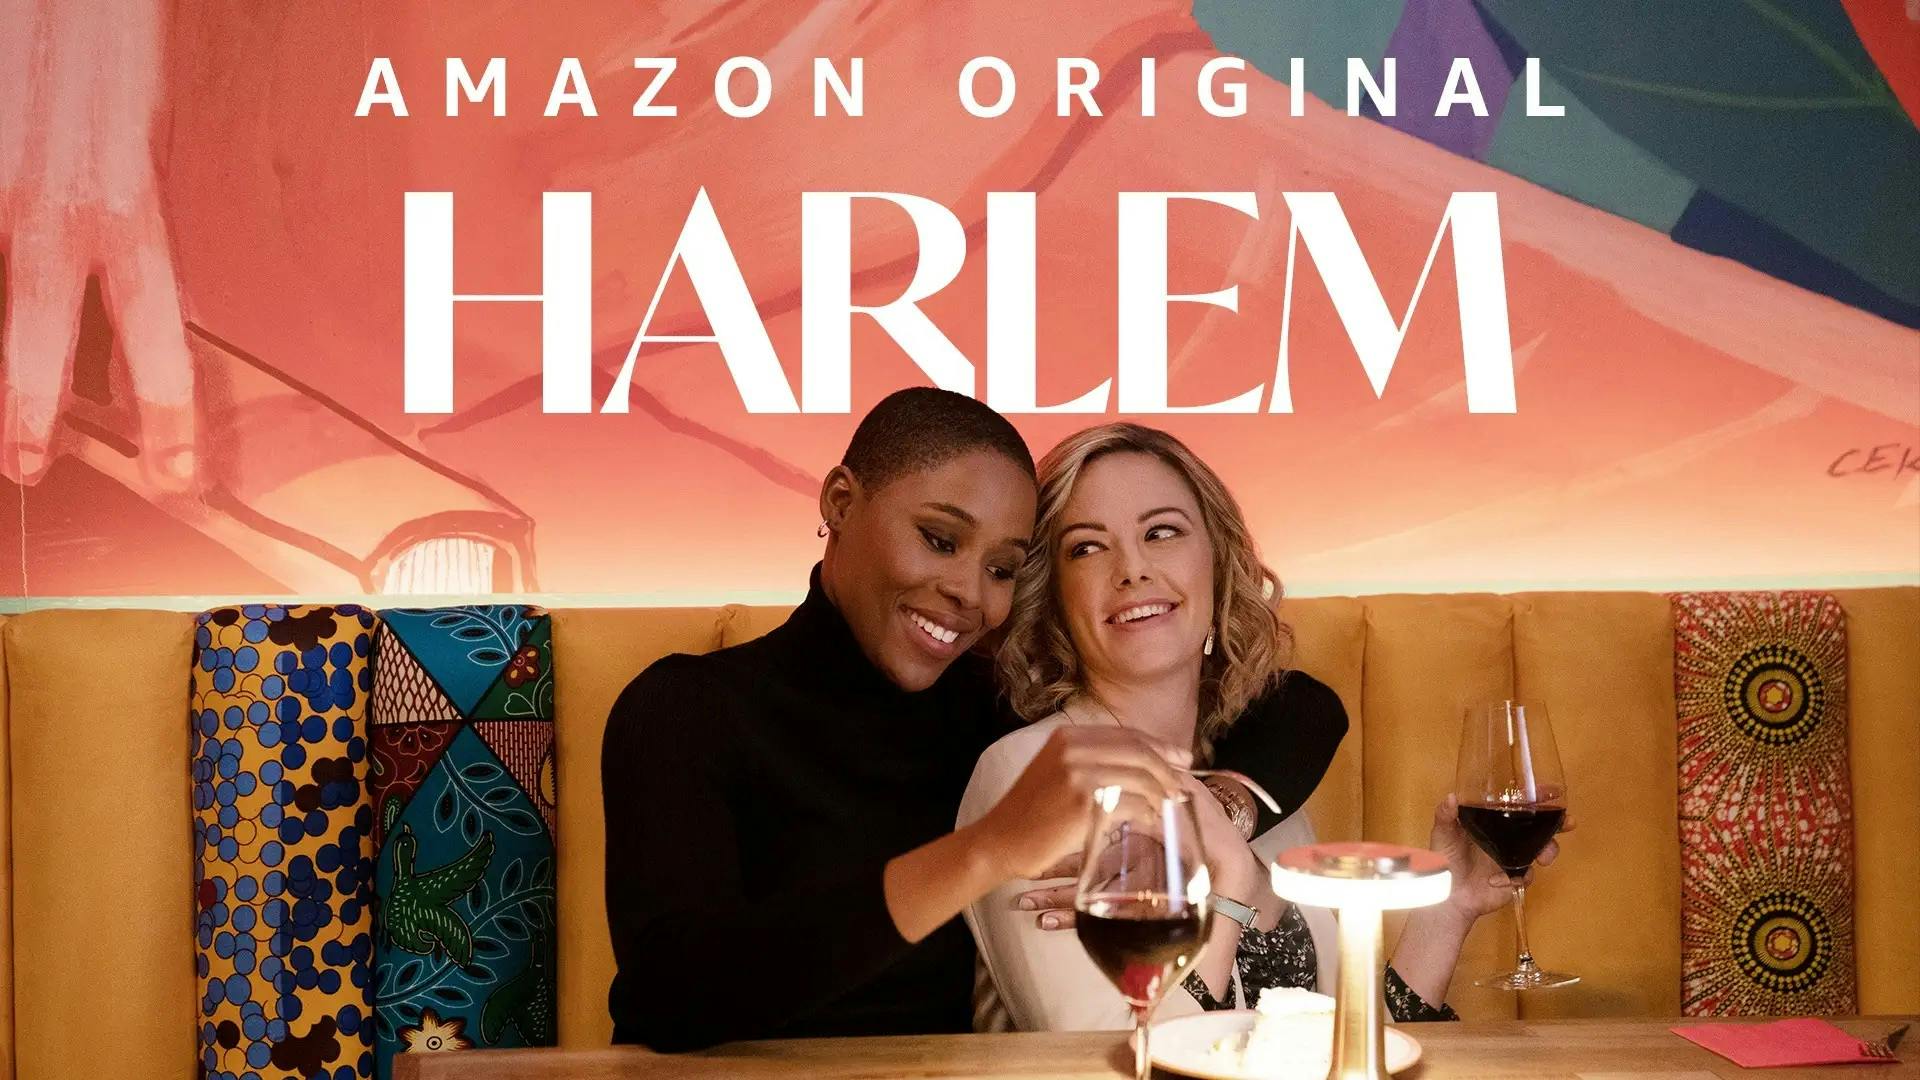 The thumbnail cover for the tv show Harlem